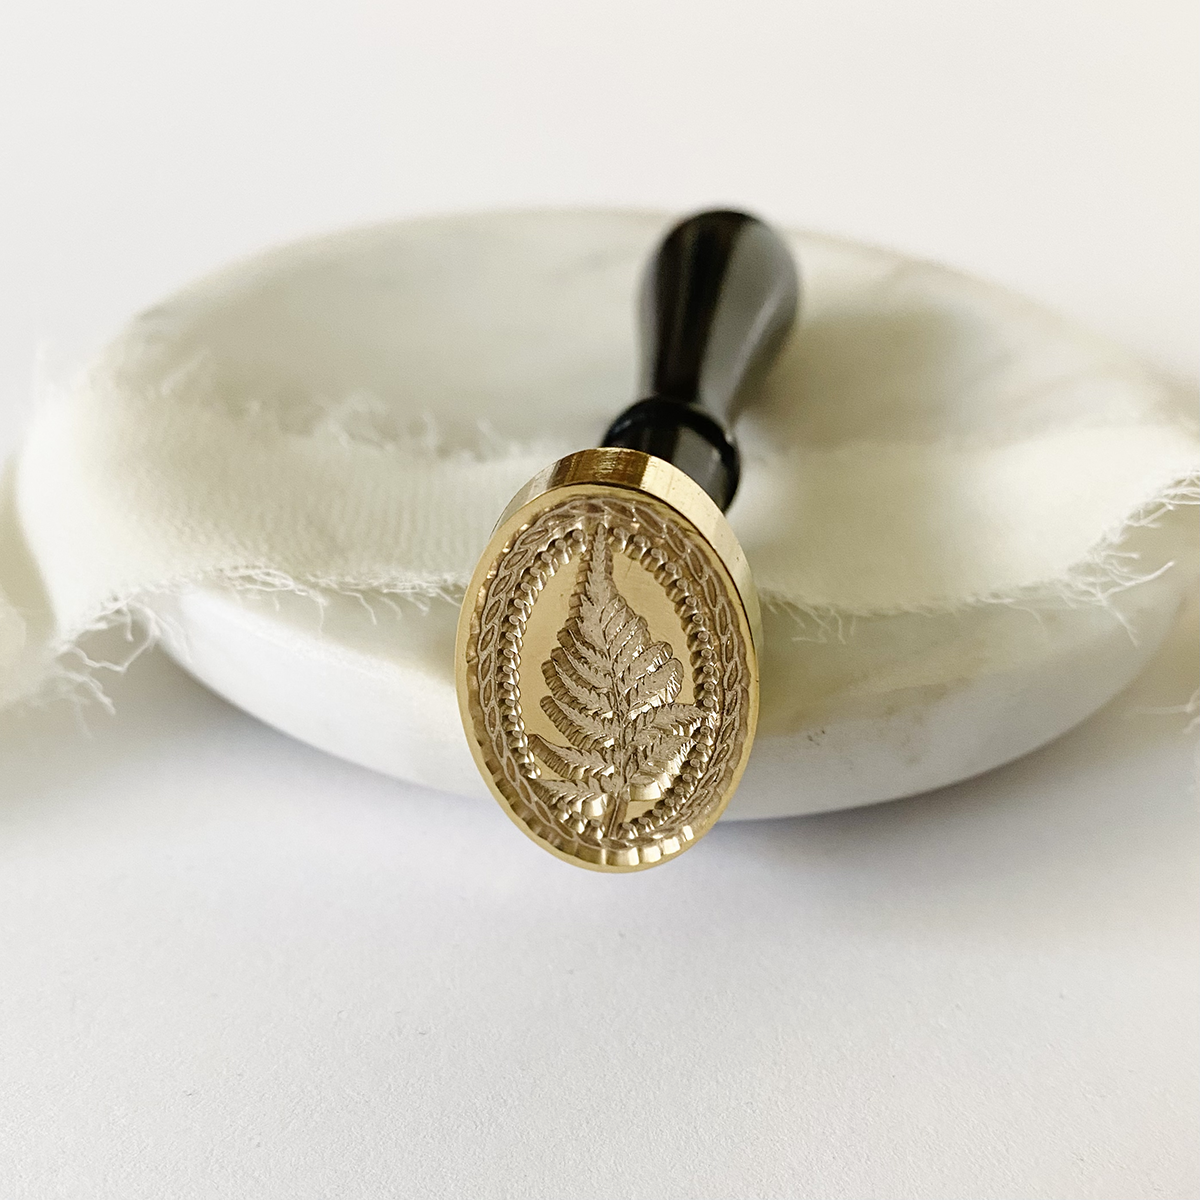 Oval Fern Wax Seal Stamp